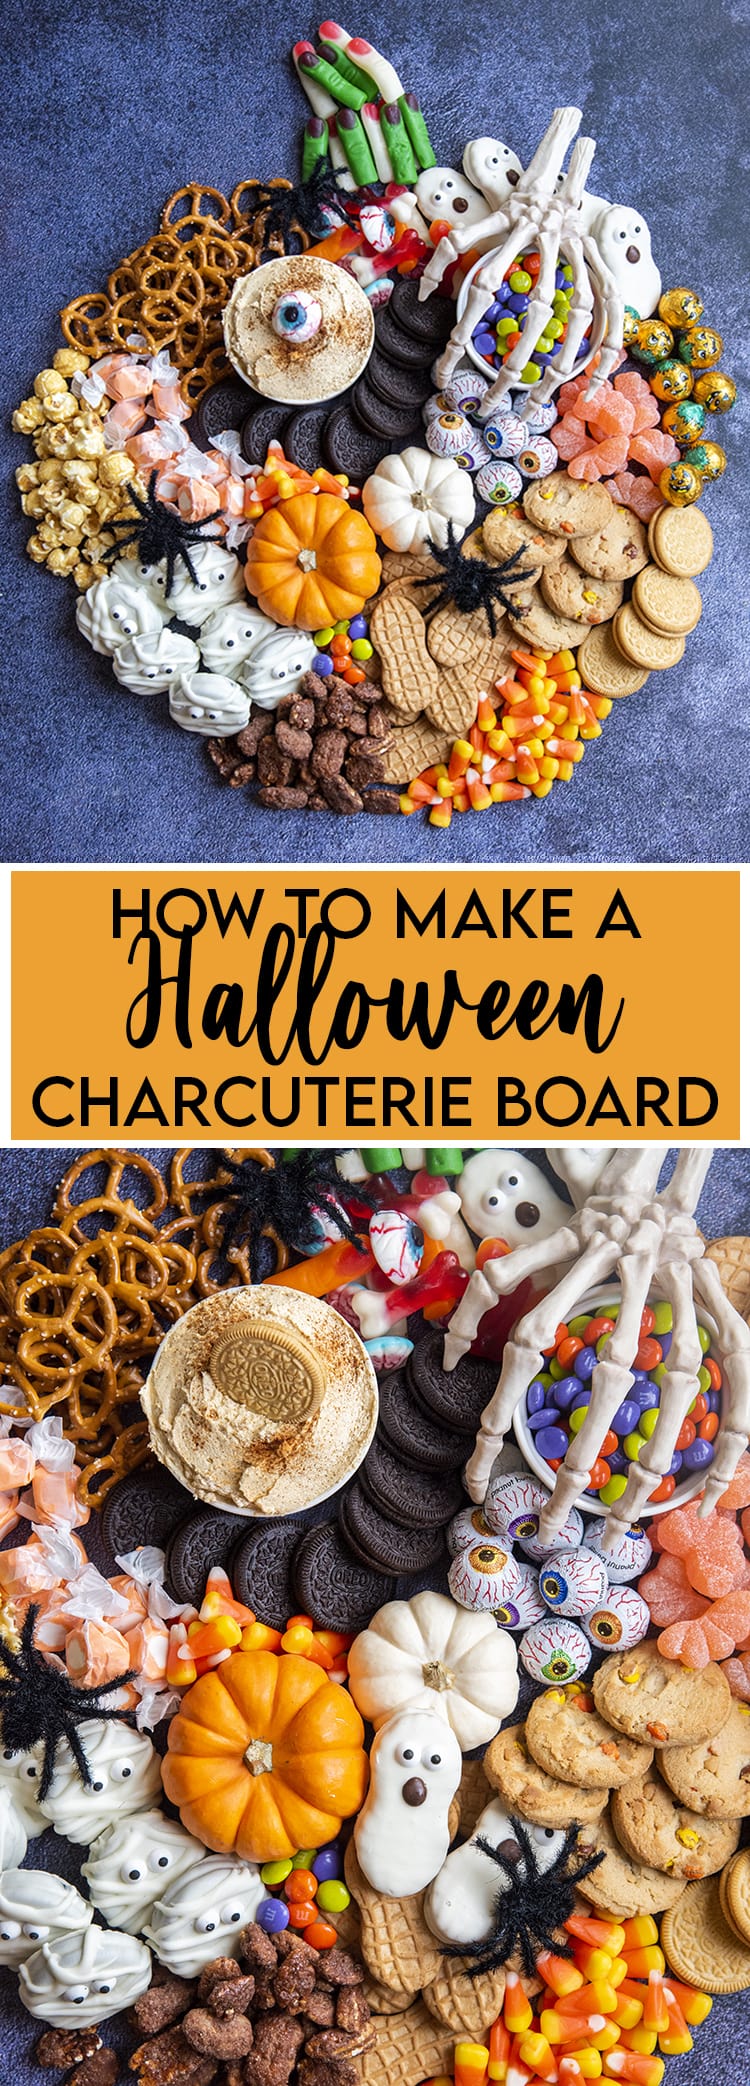 A collage showing how to make a halloween charcuterie board with assorted halloween candy and snacks